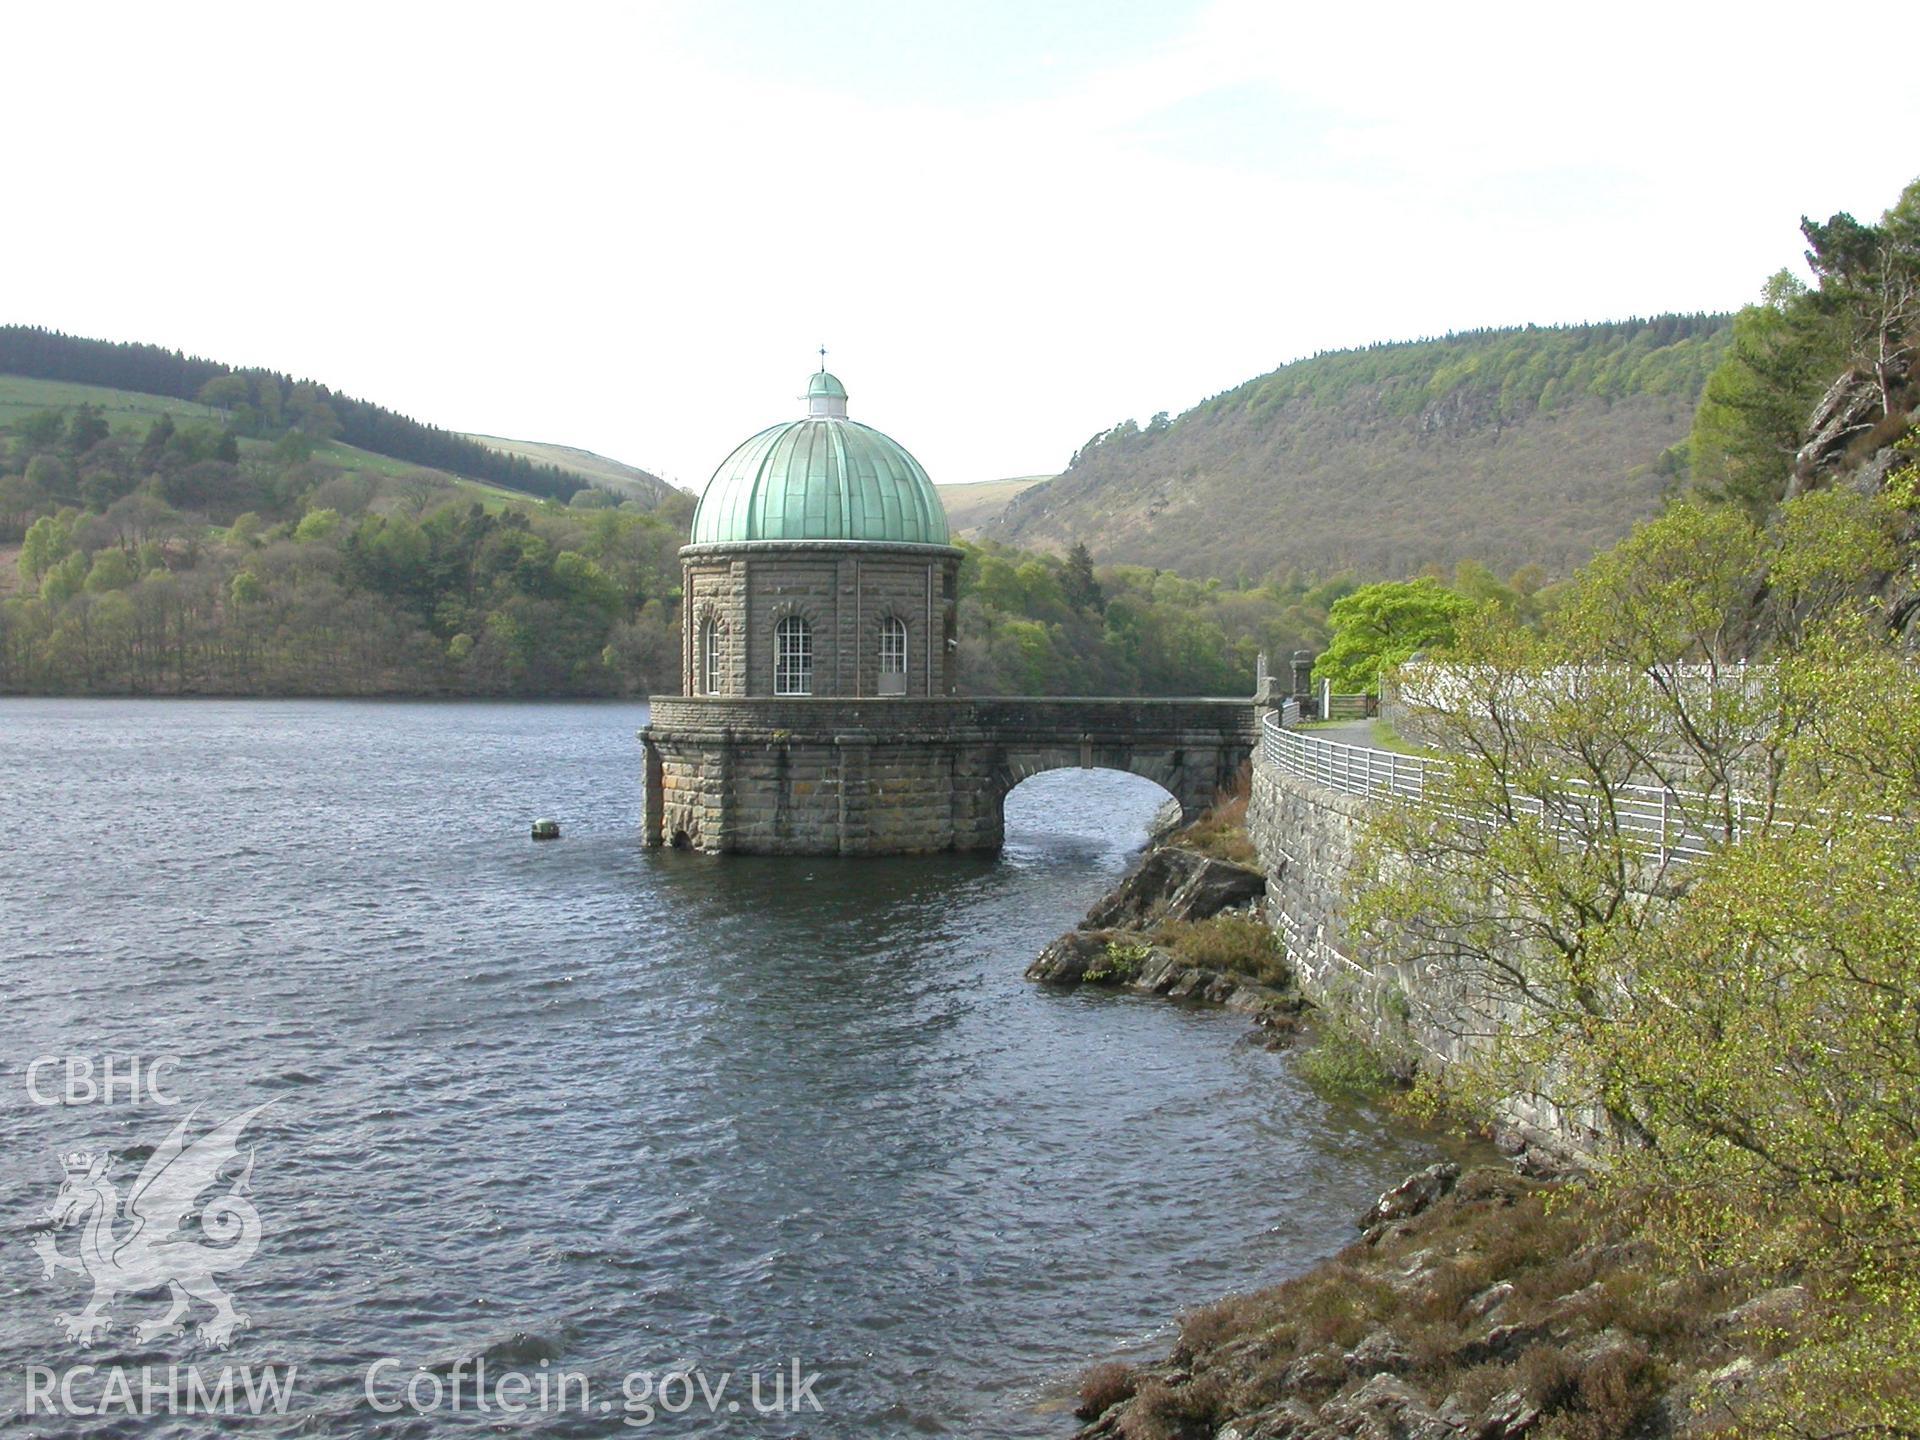 Valve tower from the Garreg-Ddu Viaduct in its setting.